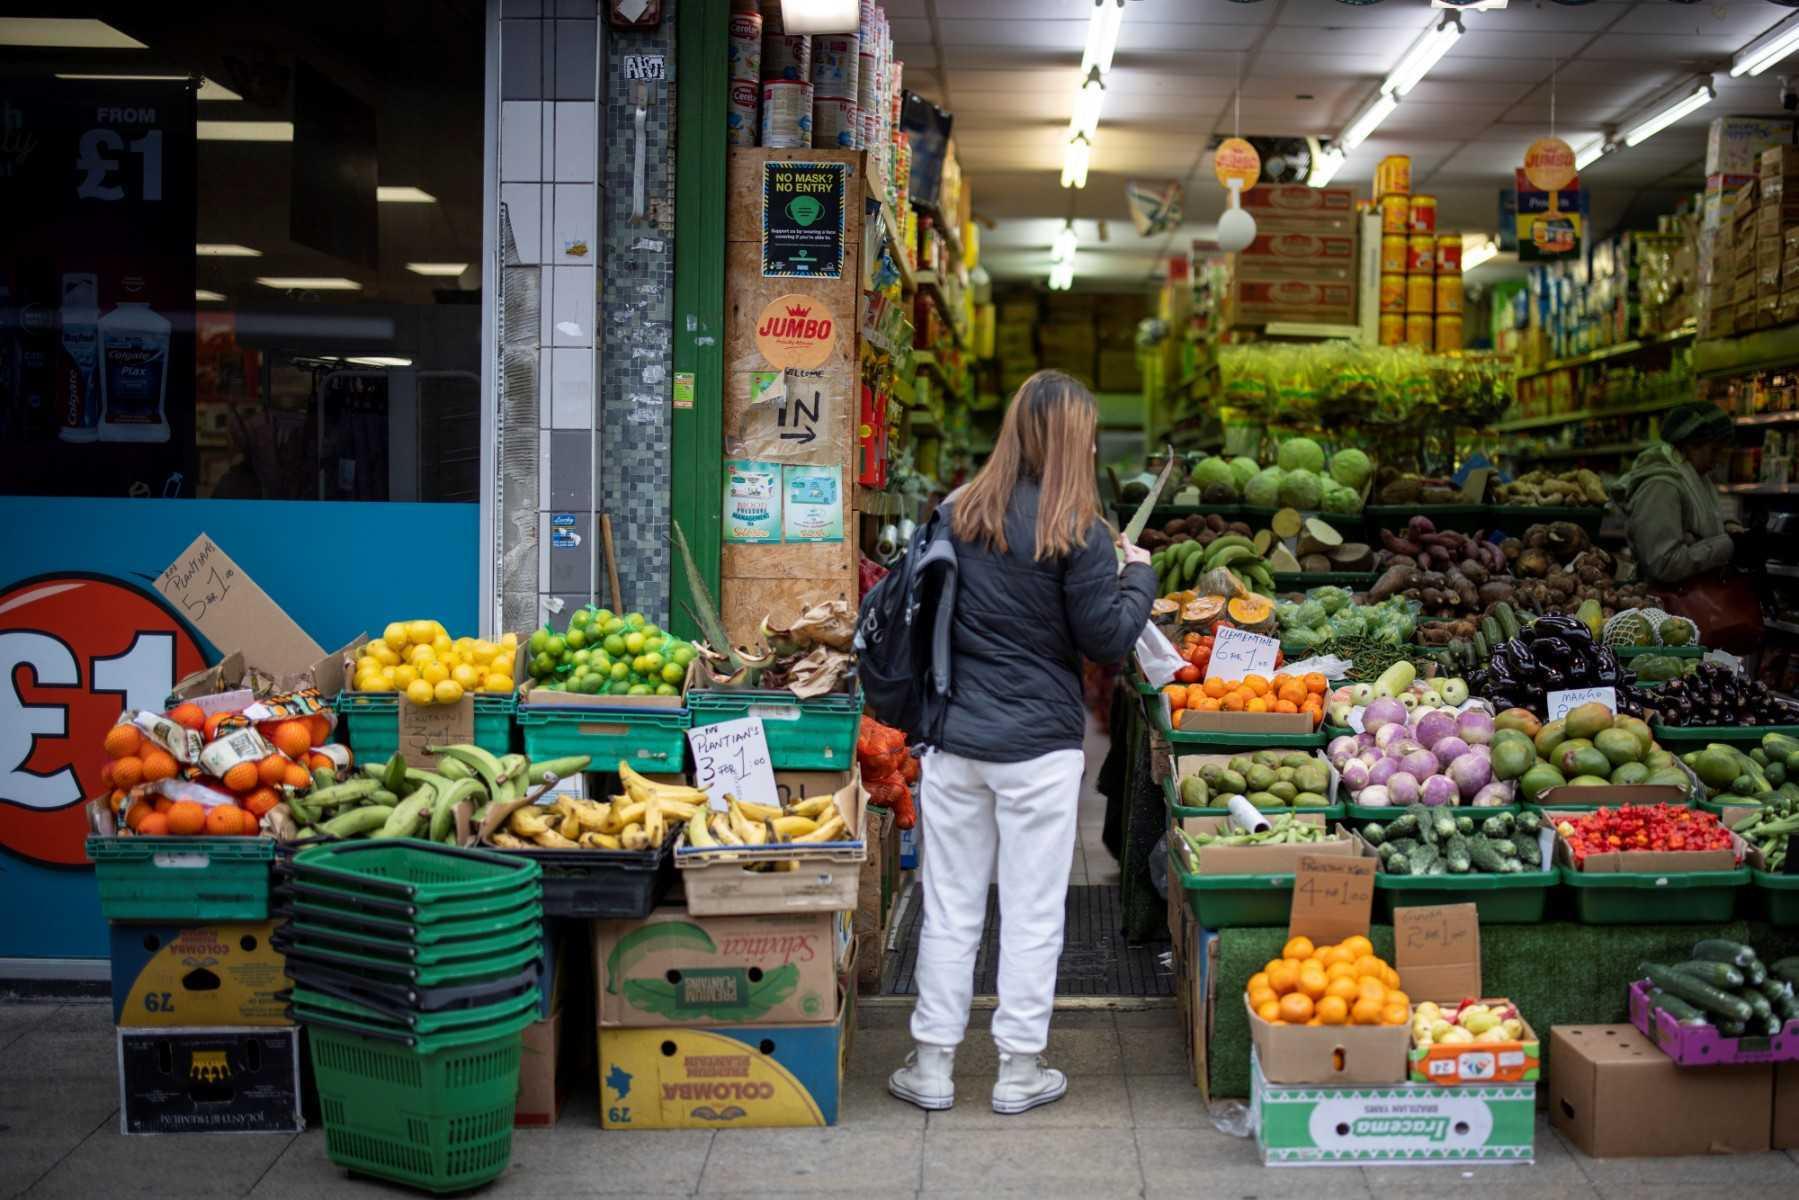 A customer shops for fruit and vegetables at a greengrocer's shop in Walthamstow, east London on Feb 13. Photo: AFP